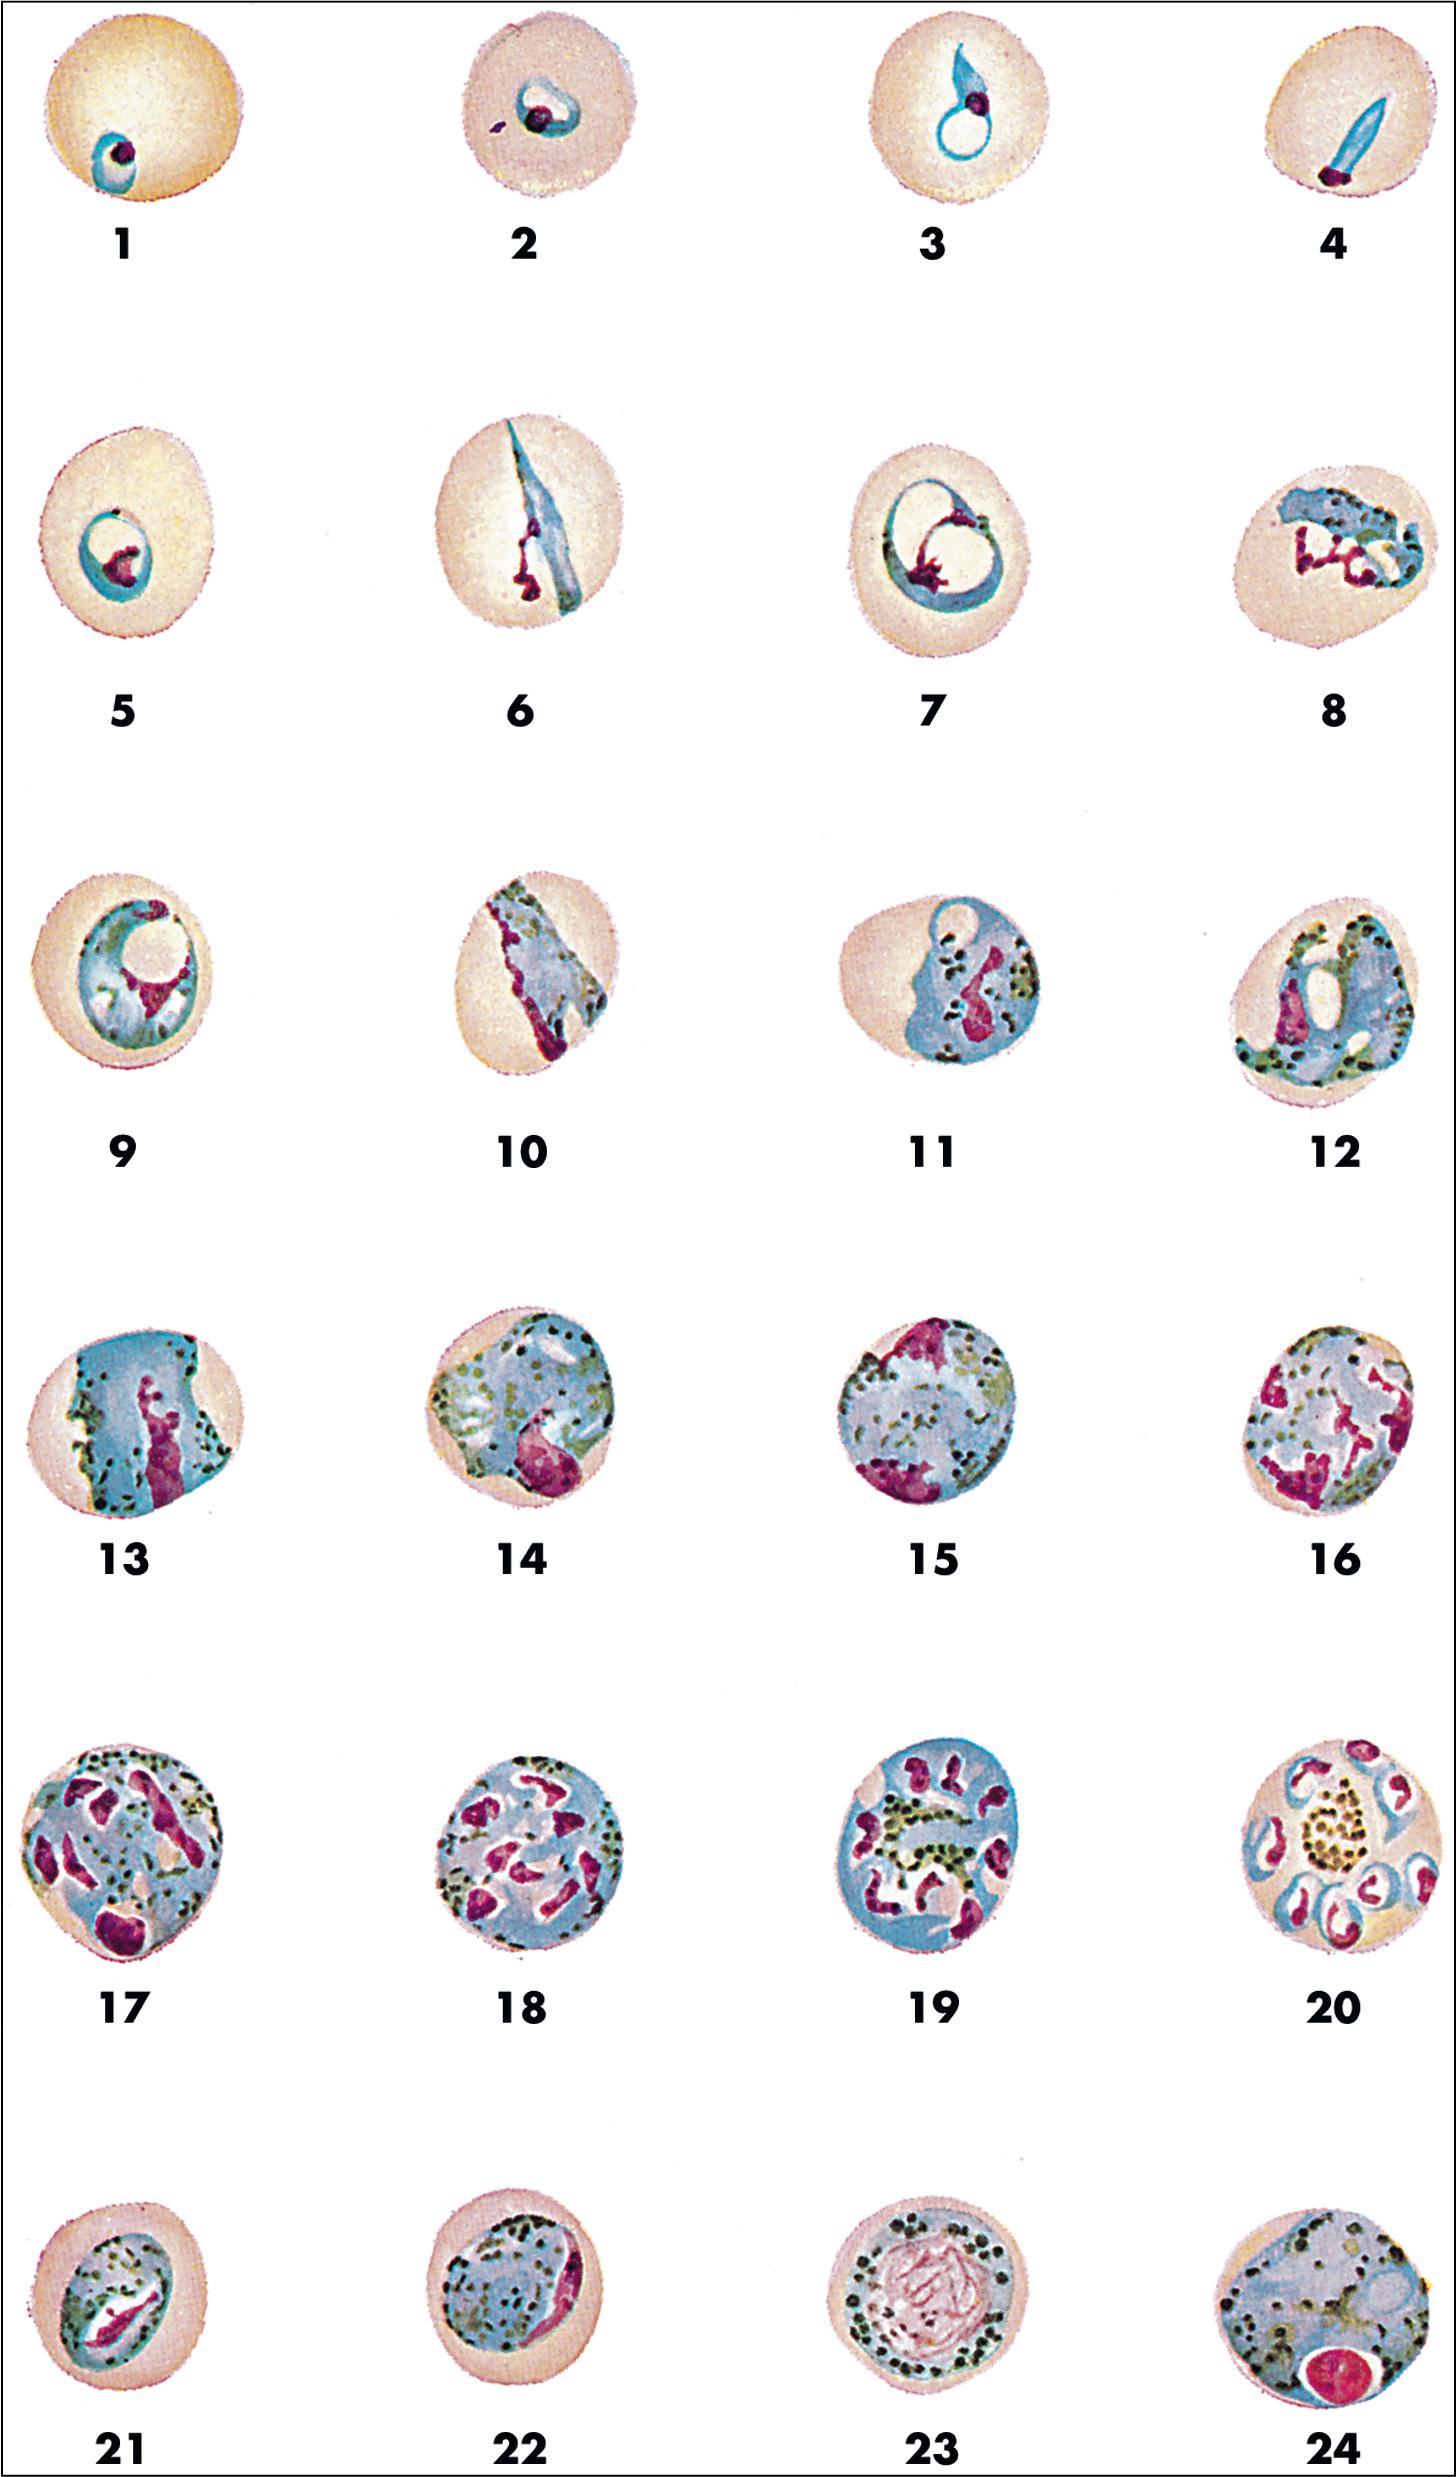 FIGURE 88.14, Life cycle stages of Plasmodium malariae . Erythrocytes infected with P. malariae have a normal or small size. Early trophozoites (rings; 1) have a relatively thick band of cytoplasm, and demonstrate an increase in cytoplasm and chromatin with maturation (2 to 5). Later-stage trophozoites may take on band forms (6, 10), basket forms (9), and other configurations (7, 8, and 11 to 14). Trophozoites become early schizonts when the chromatin mass divides, producing more than one chromatin dot (15 to 19). Eventually, mature schizonts containing 6 to 12 segmented merozoites are formed (20). The characteristic “rosette” schizont forms when merozoites align around a central pigment mass. The mature schizont will rupture to release individual merozoites that can each infect a new erythrocyte. Some parasites form early gametes rather than schizonts (21 and 22) that mature into microgametocytes (23) or macrogametocytes (24).